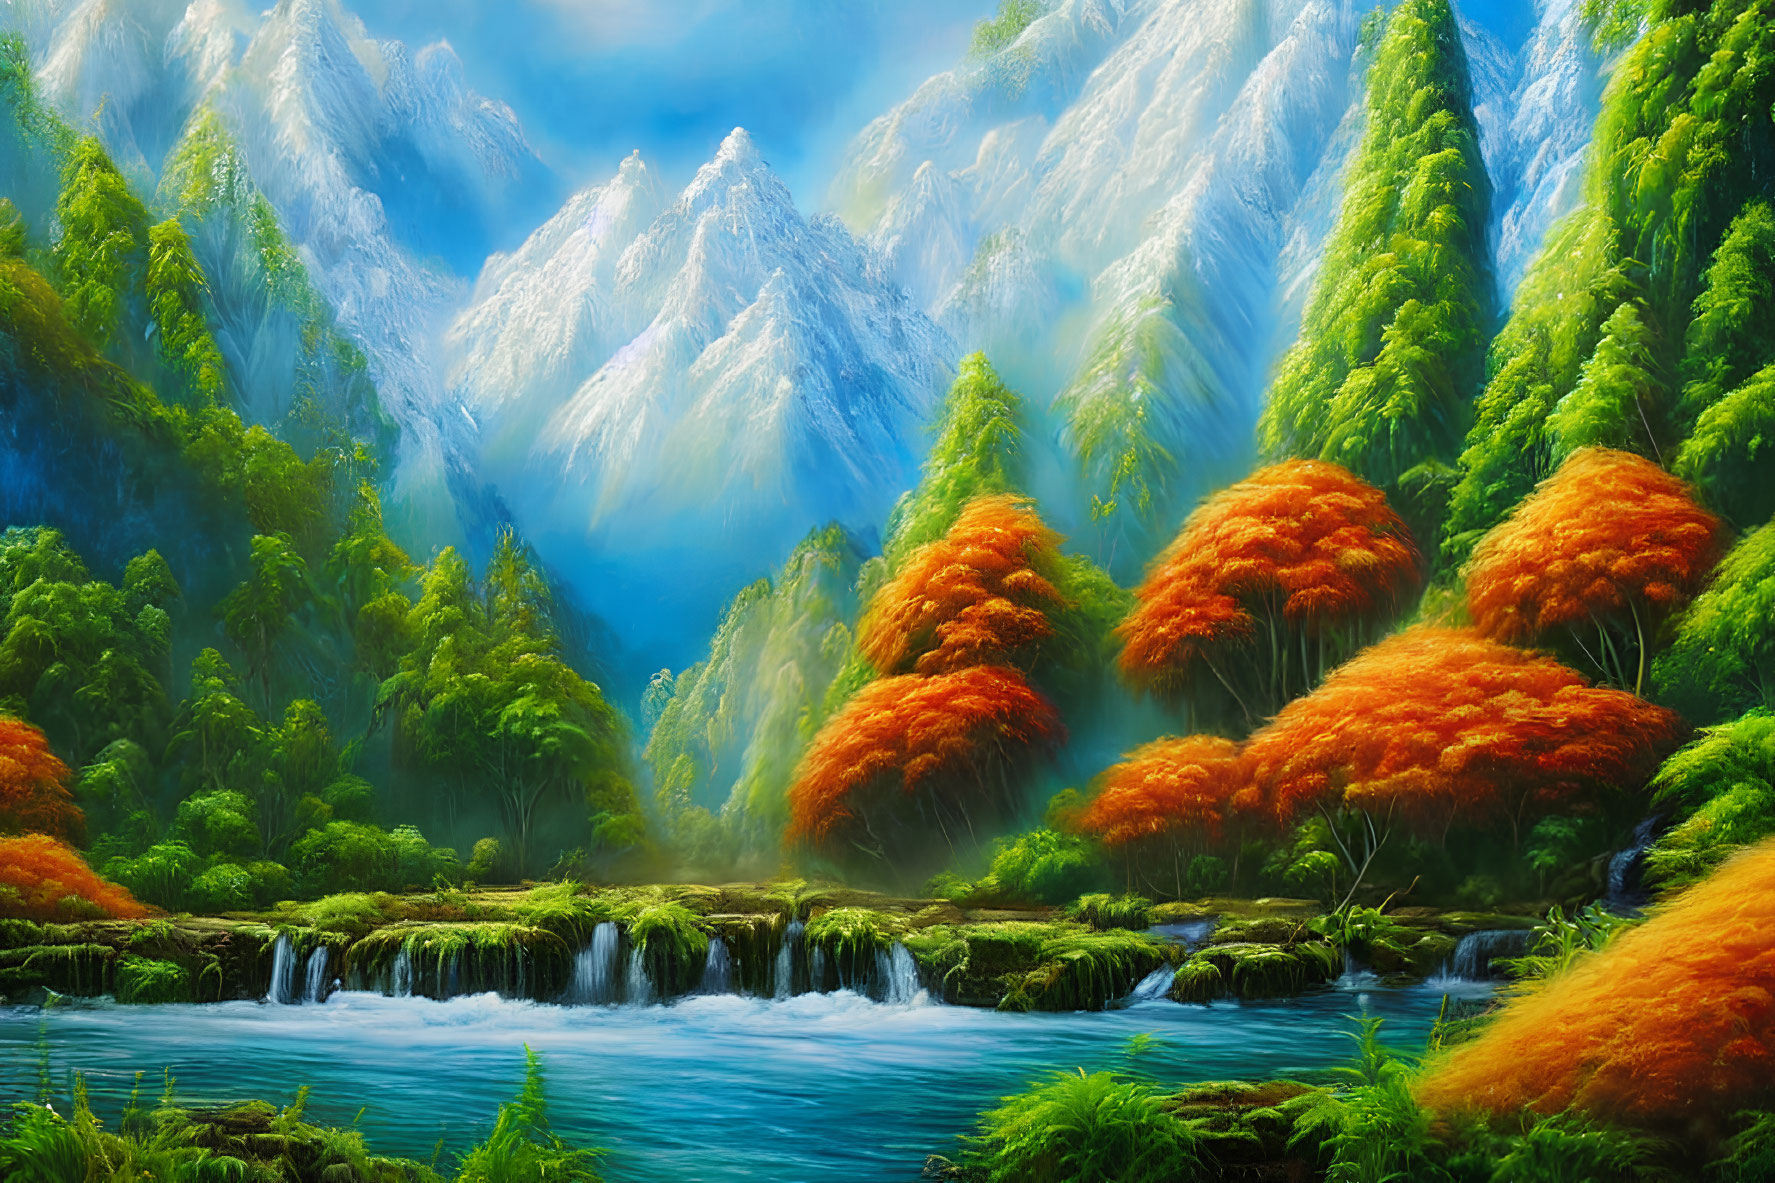 Scenic forest painting with autumn trees, river, and mountains